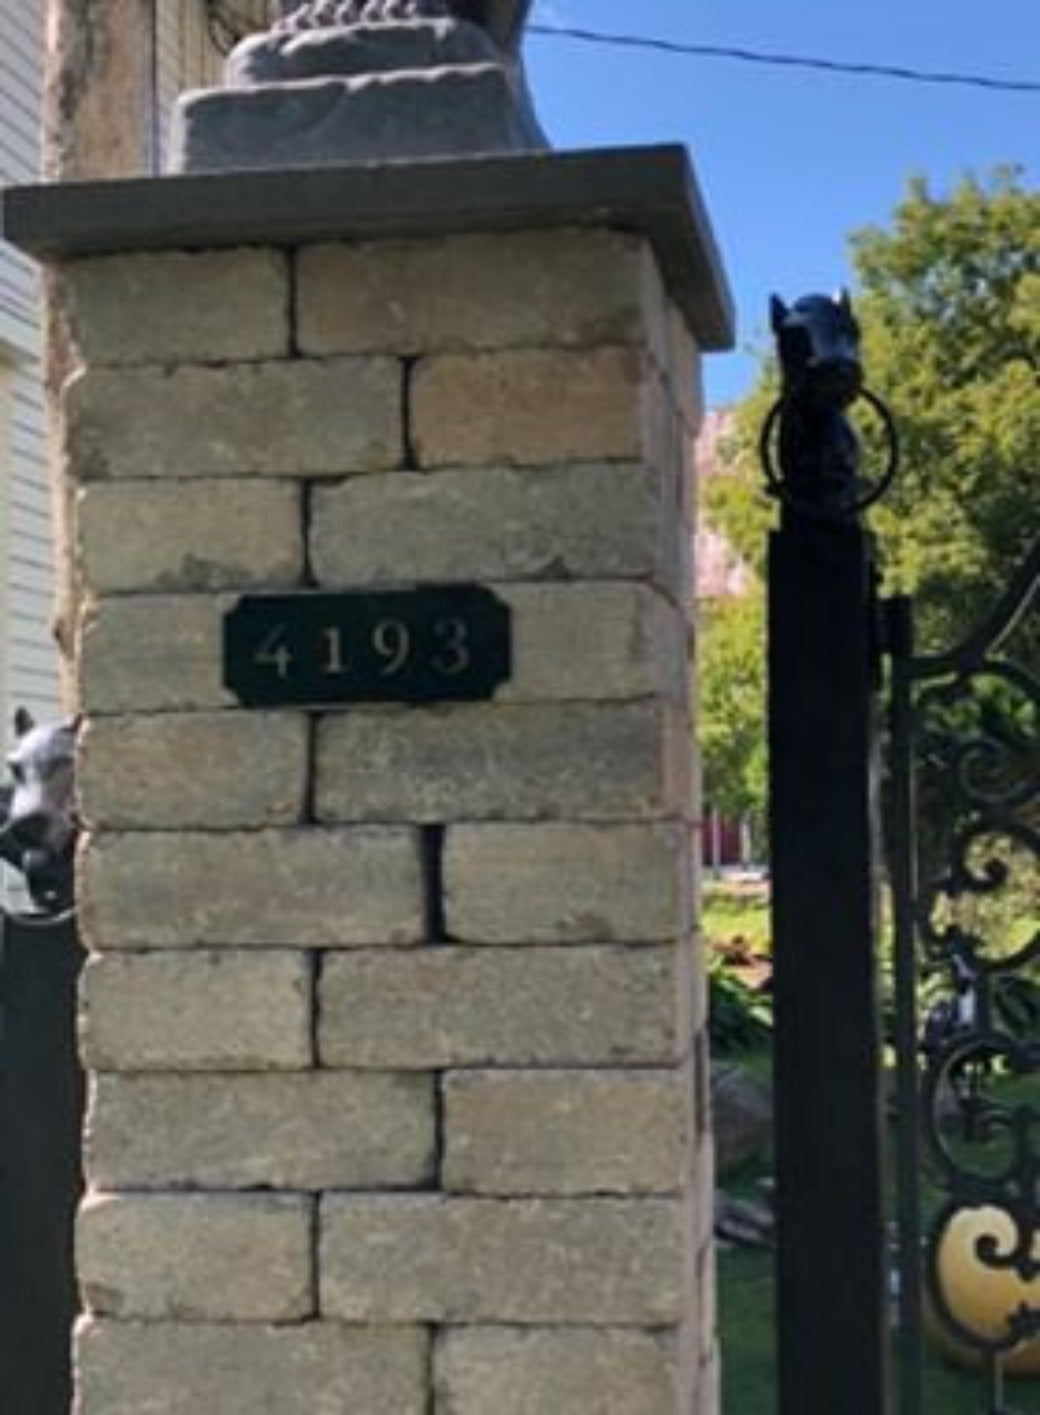 Personalized metal address plaque on brick.